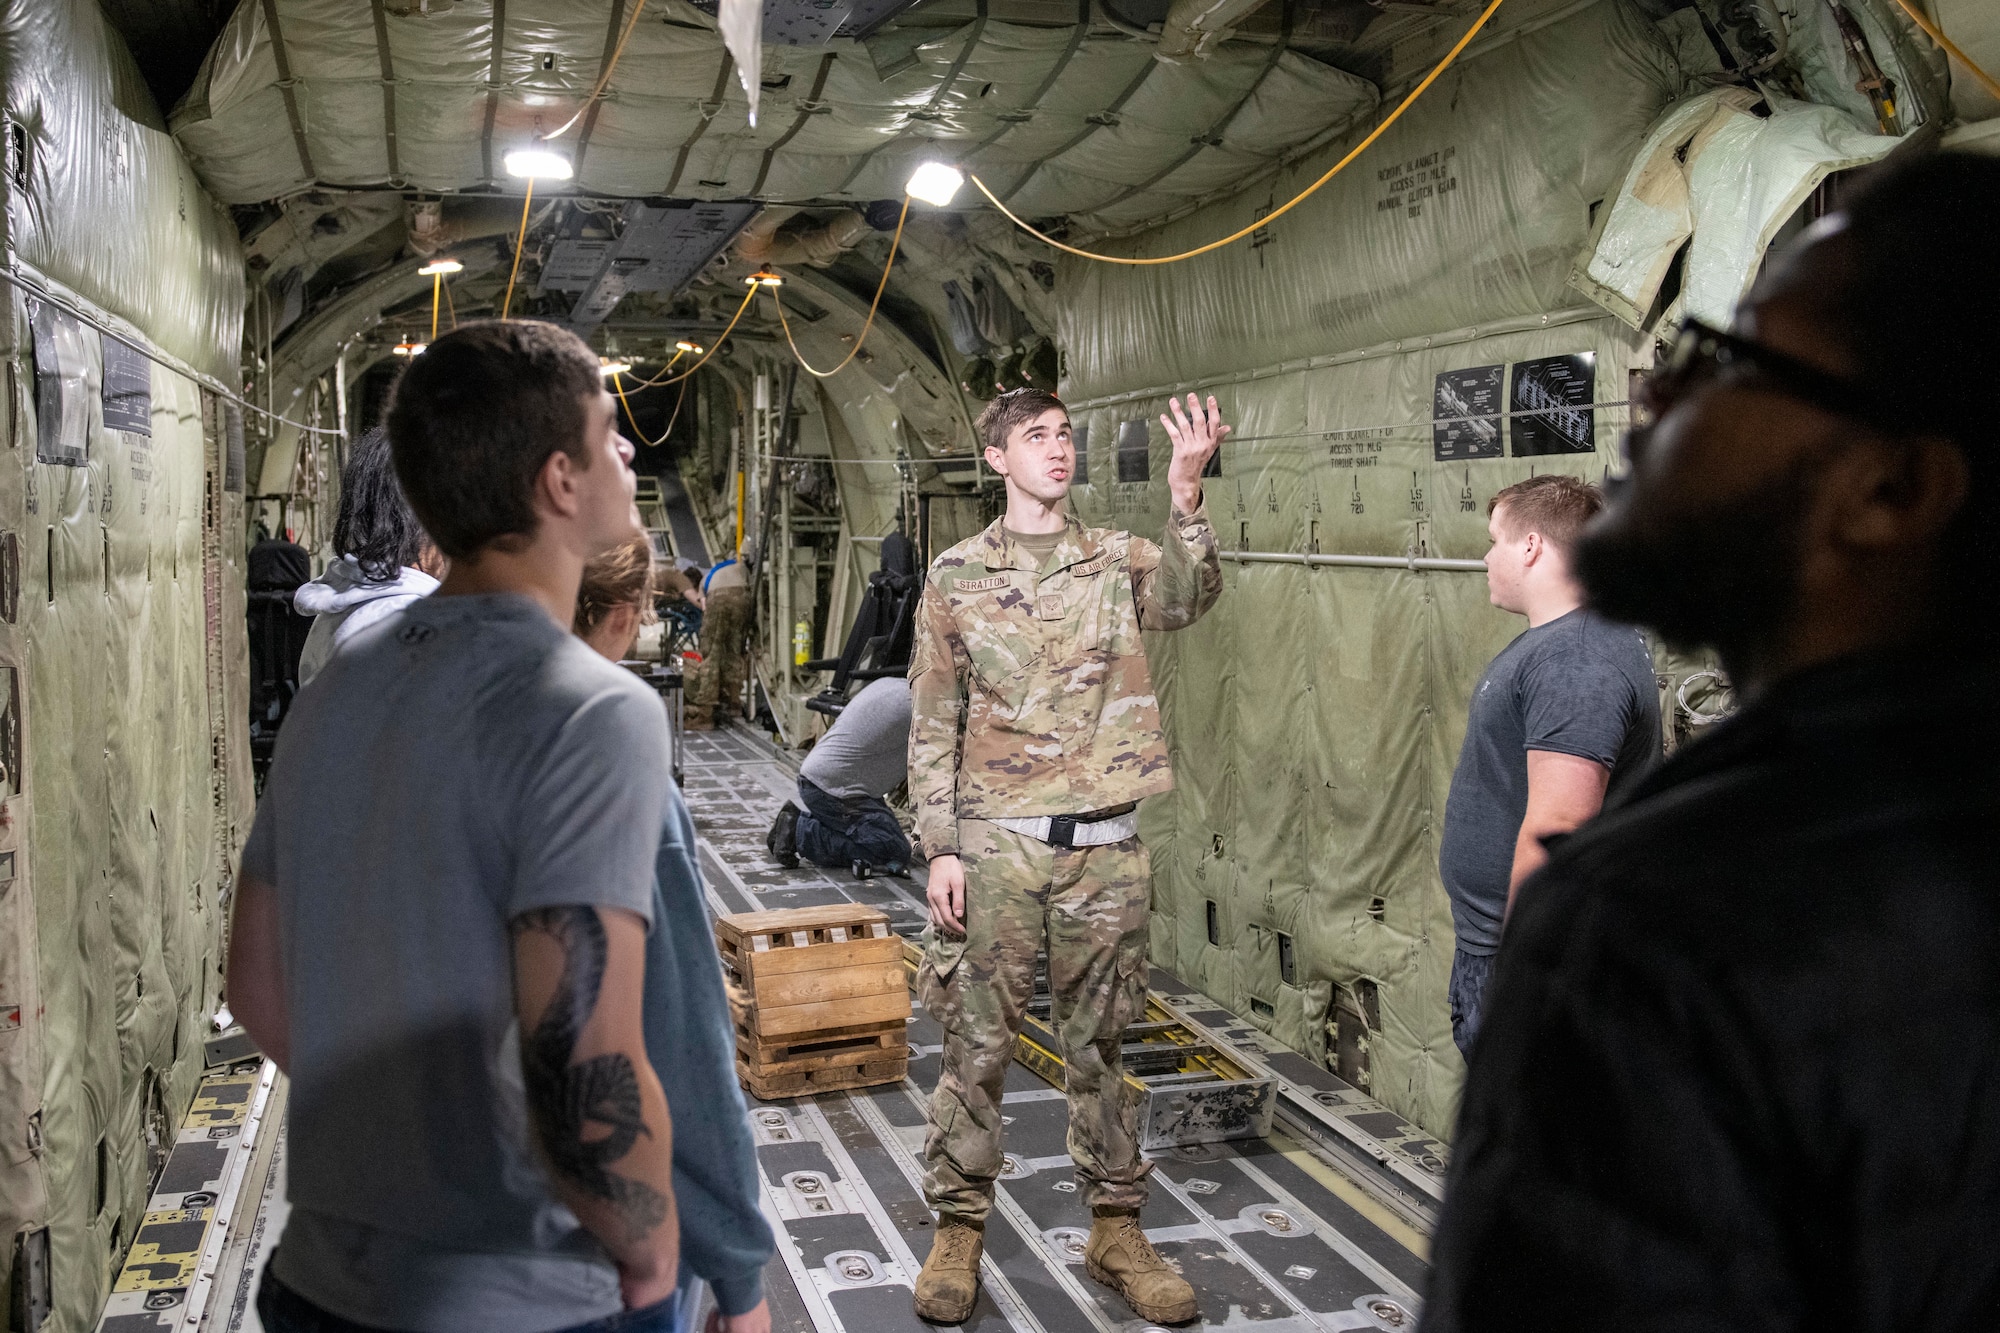 An Airman assigned to the 19th Maintenance Squadron leads prospective Airmen through a C-130J Super Hercules